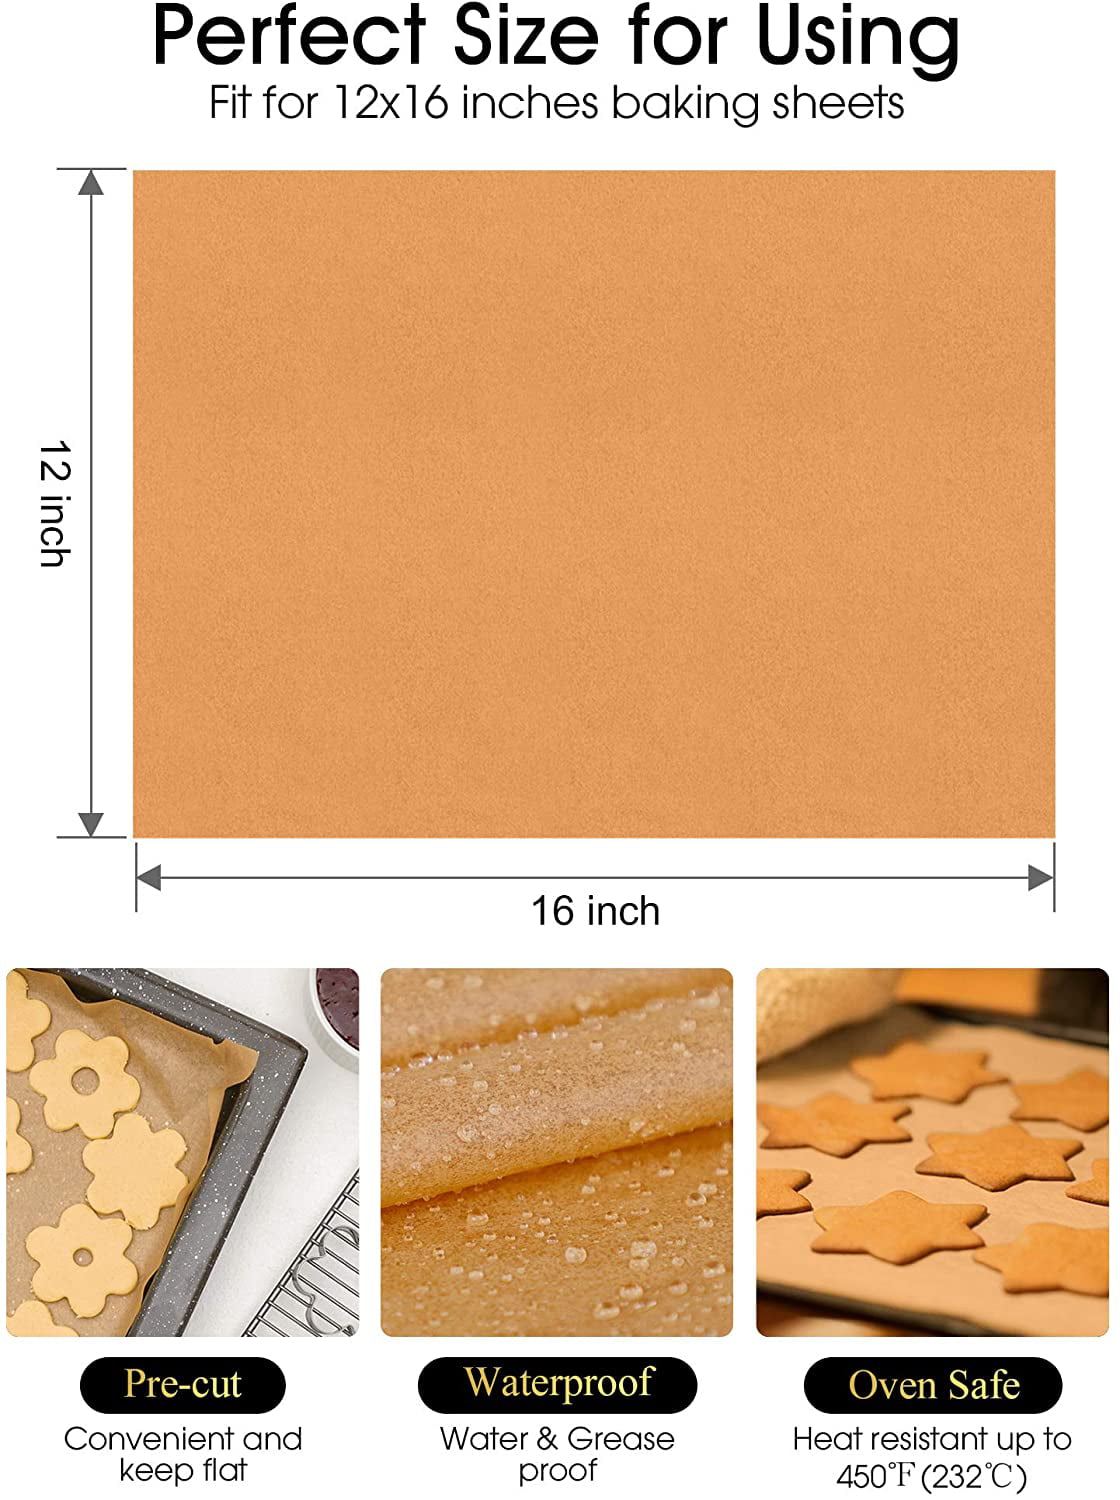 KAULUS Parchment Baking Paper Roll 26FT Paper Baking Sheets for Baking  Cookies Cooking Frying Air Fryer Grilling Rack - Brown Wholesale